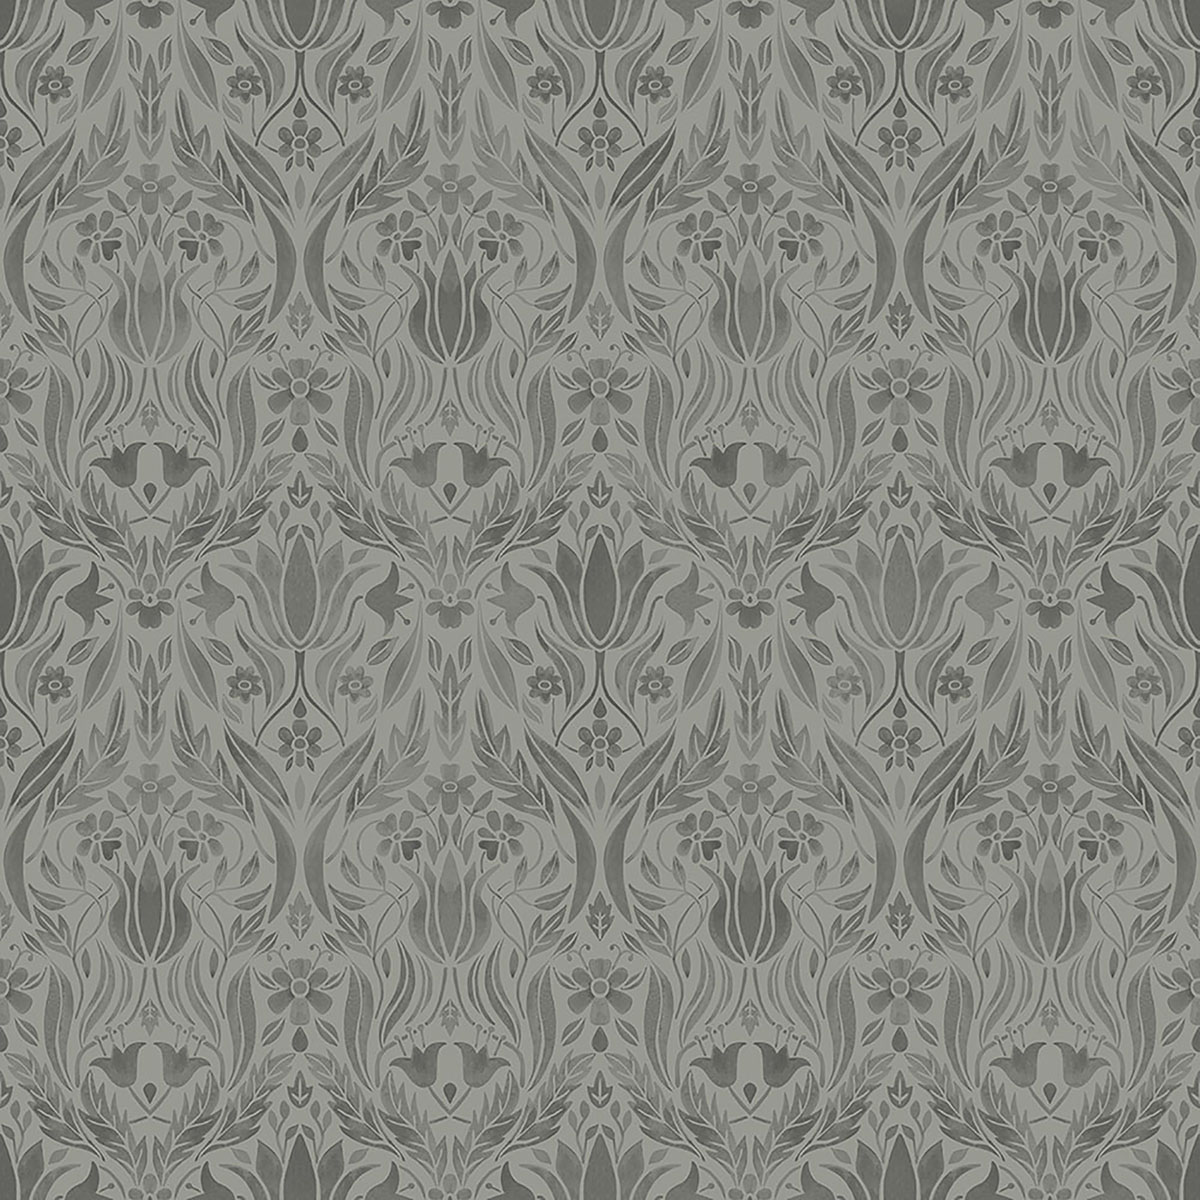 Ludvig Dark Grey Floral Ogee Wallpaper |Wallpaper And Borders |The